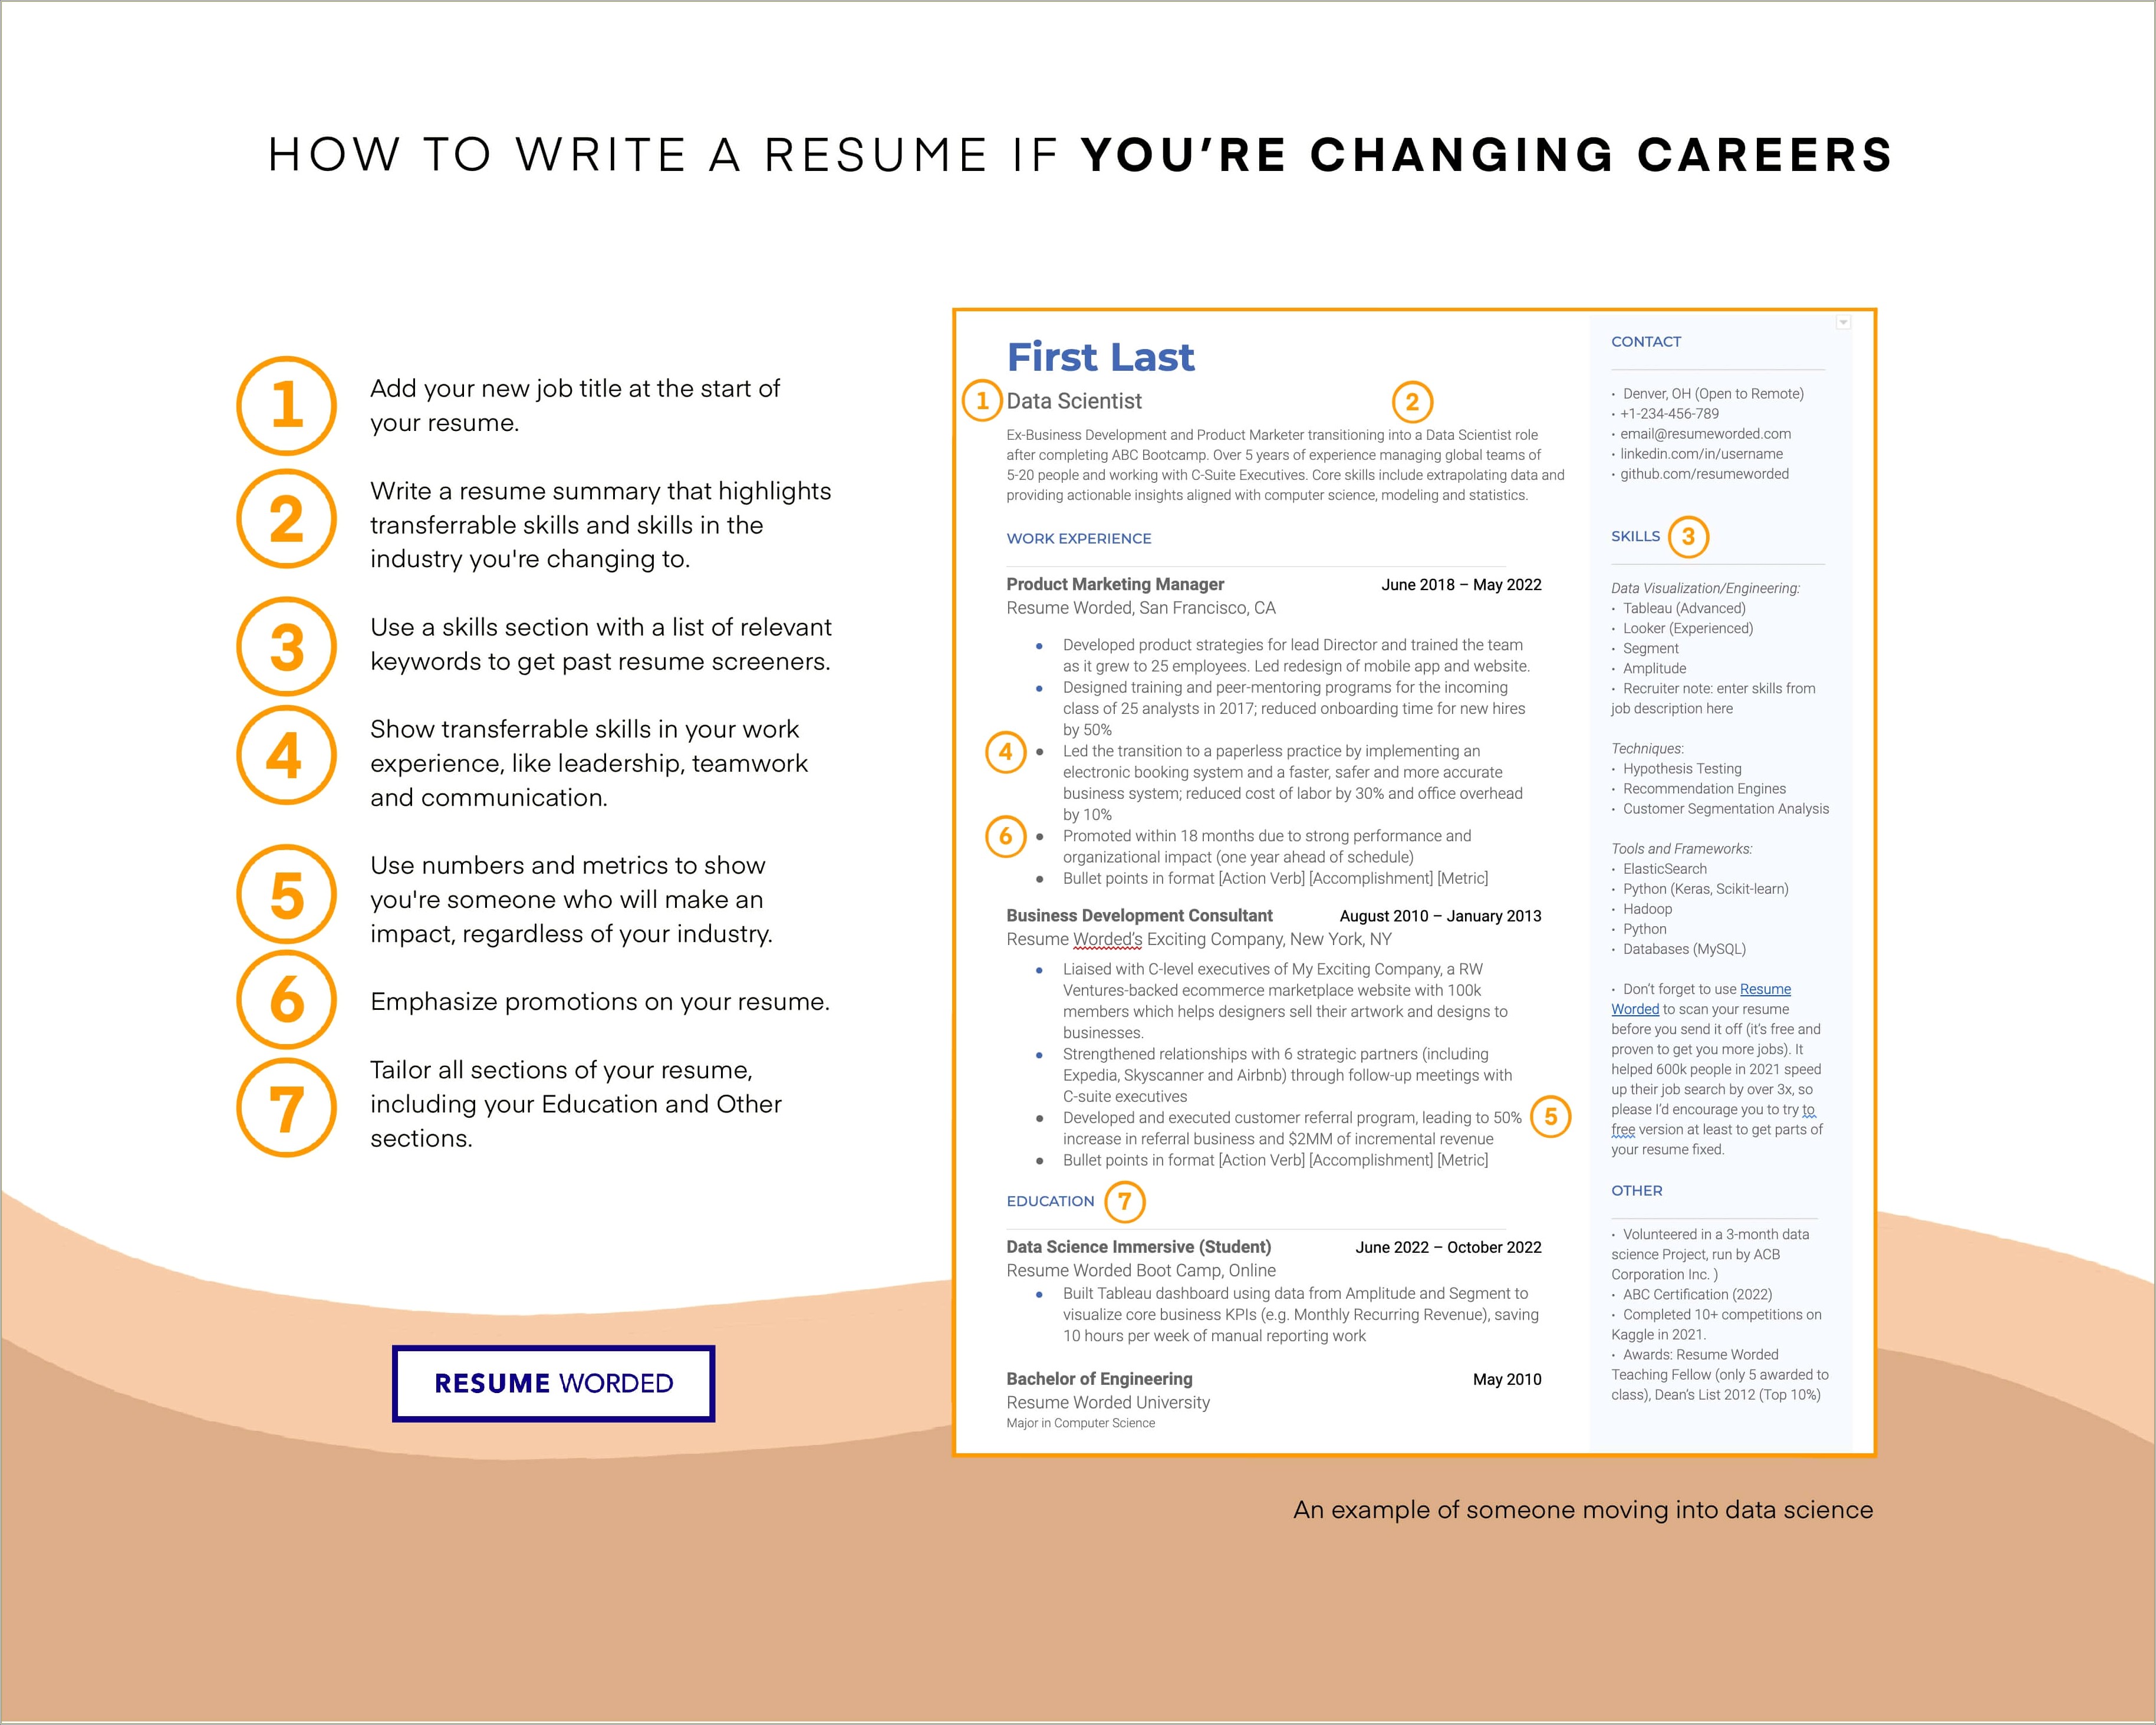 Adding A Job On A Resume After Leaving